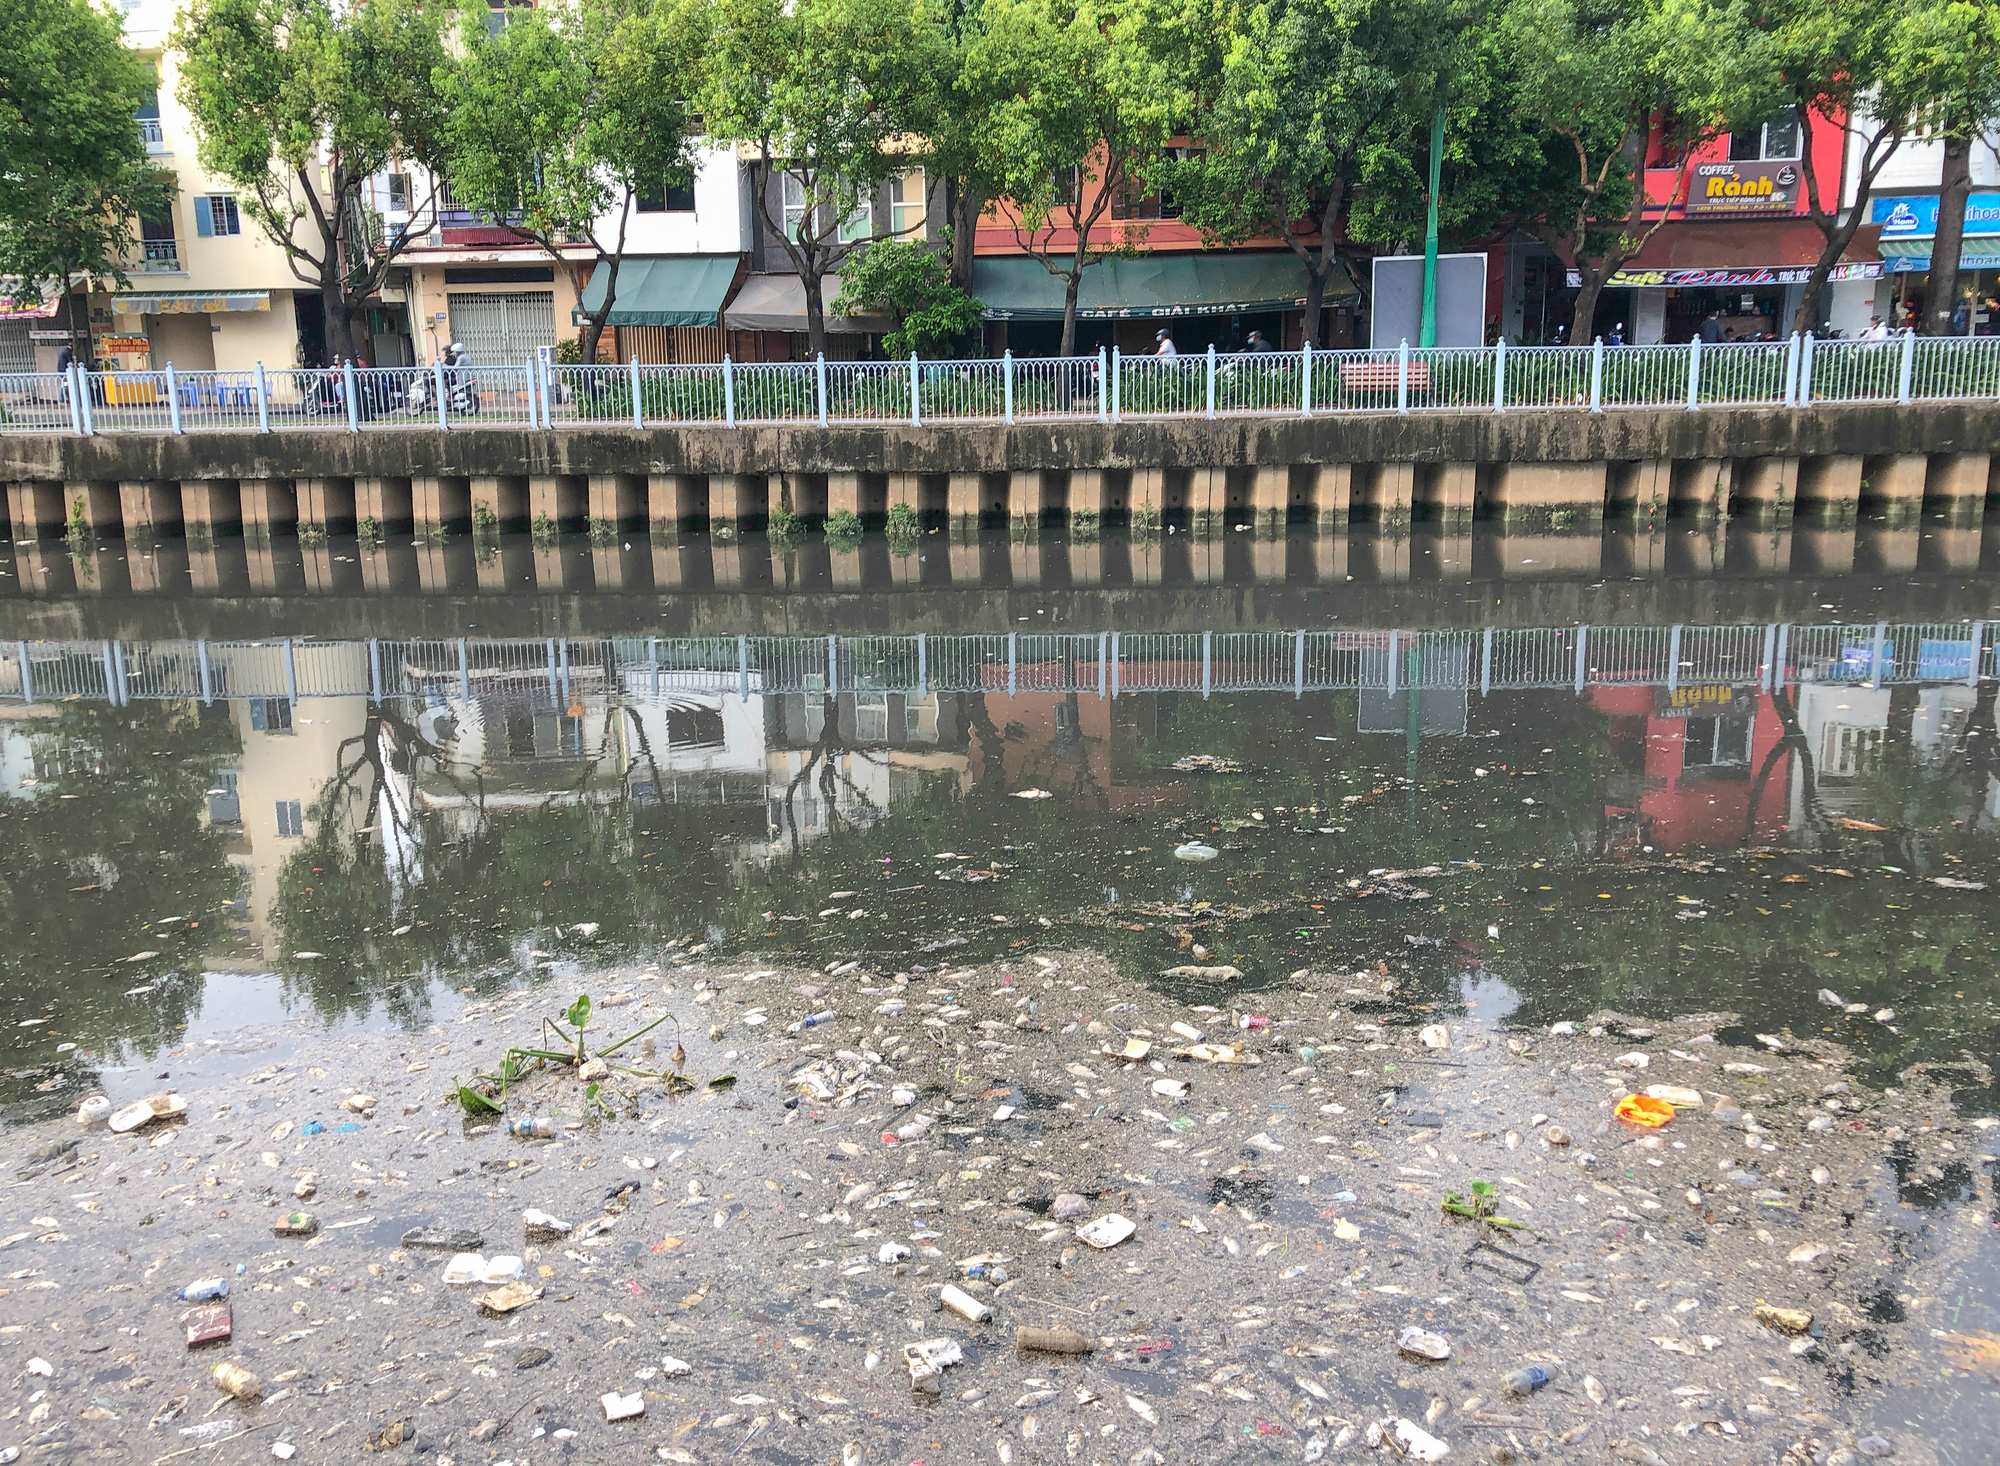 The mass fish death is exacerbated by garbage along Nhieu Loc - Thi Nghe Canal in Ho Chi Minh City, April 4, 2021. Photo: Chau Tuan / Tuoi Tre